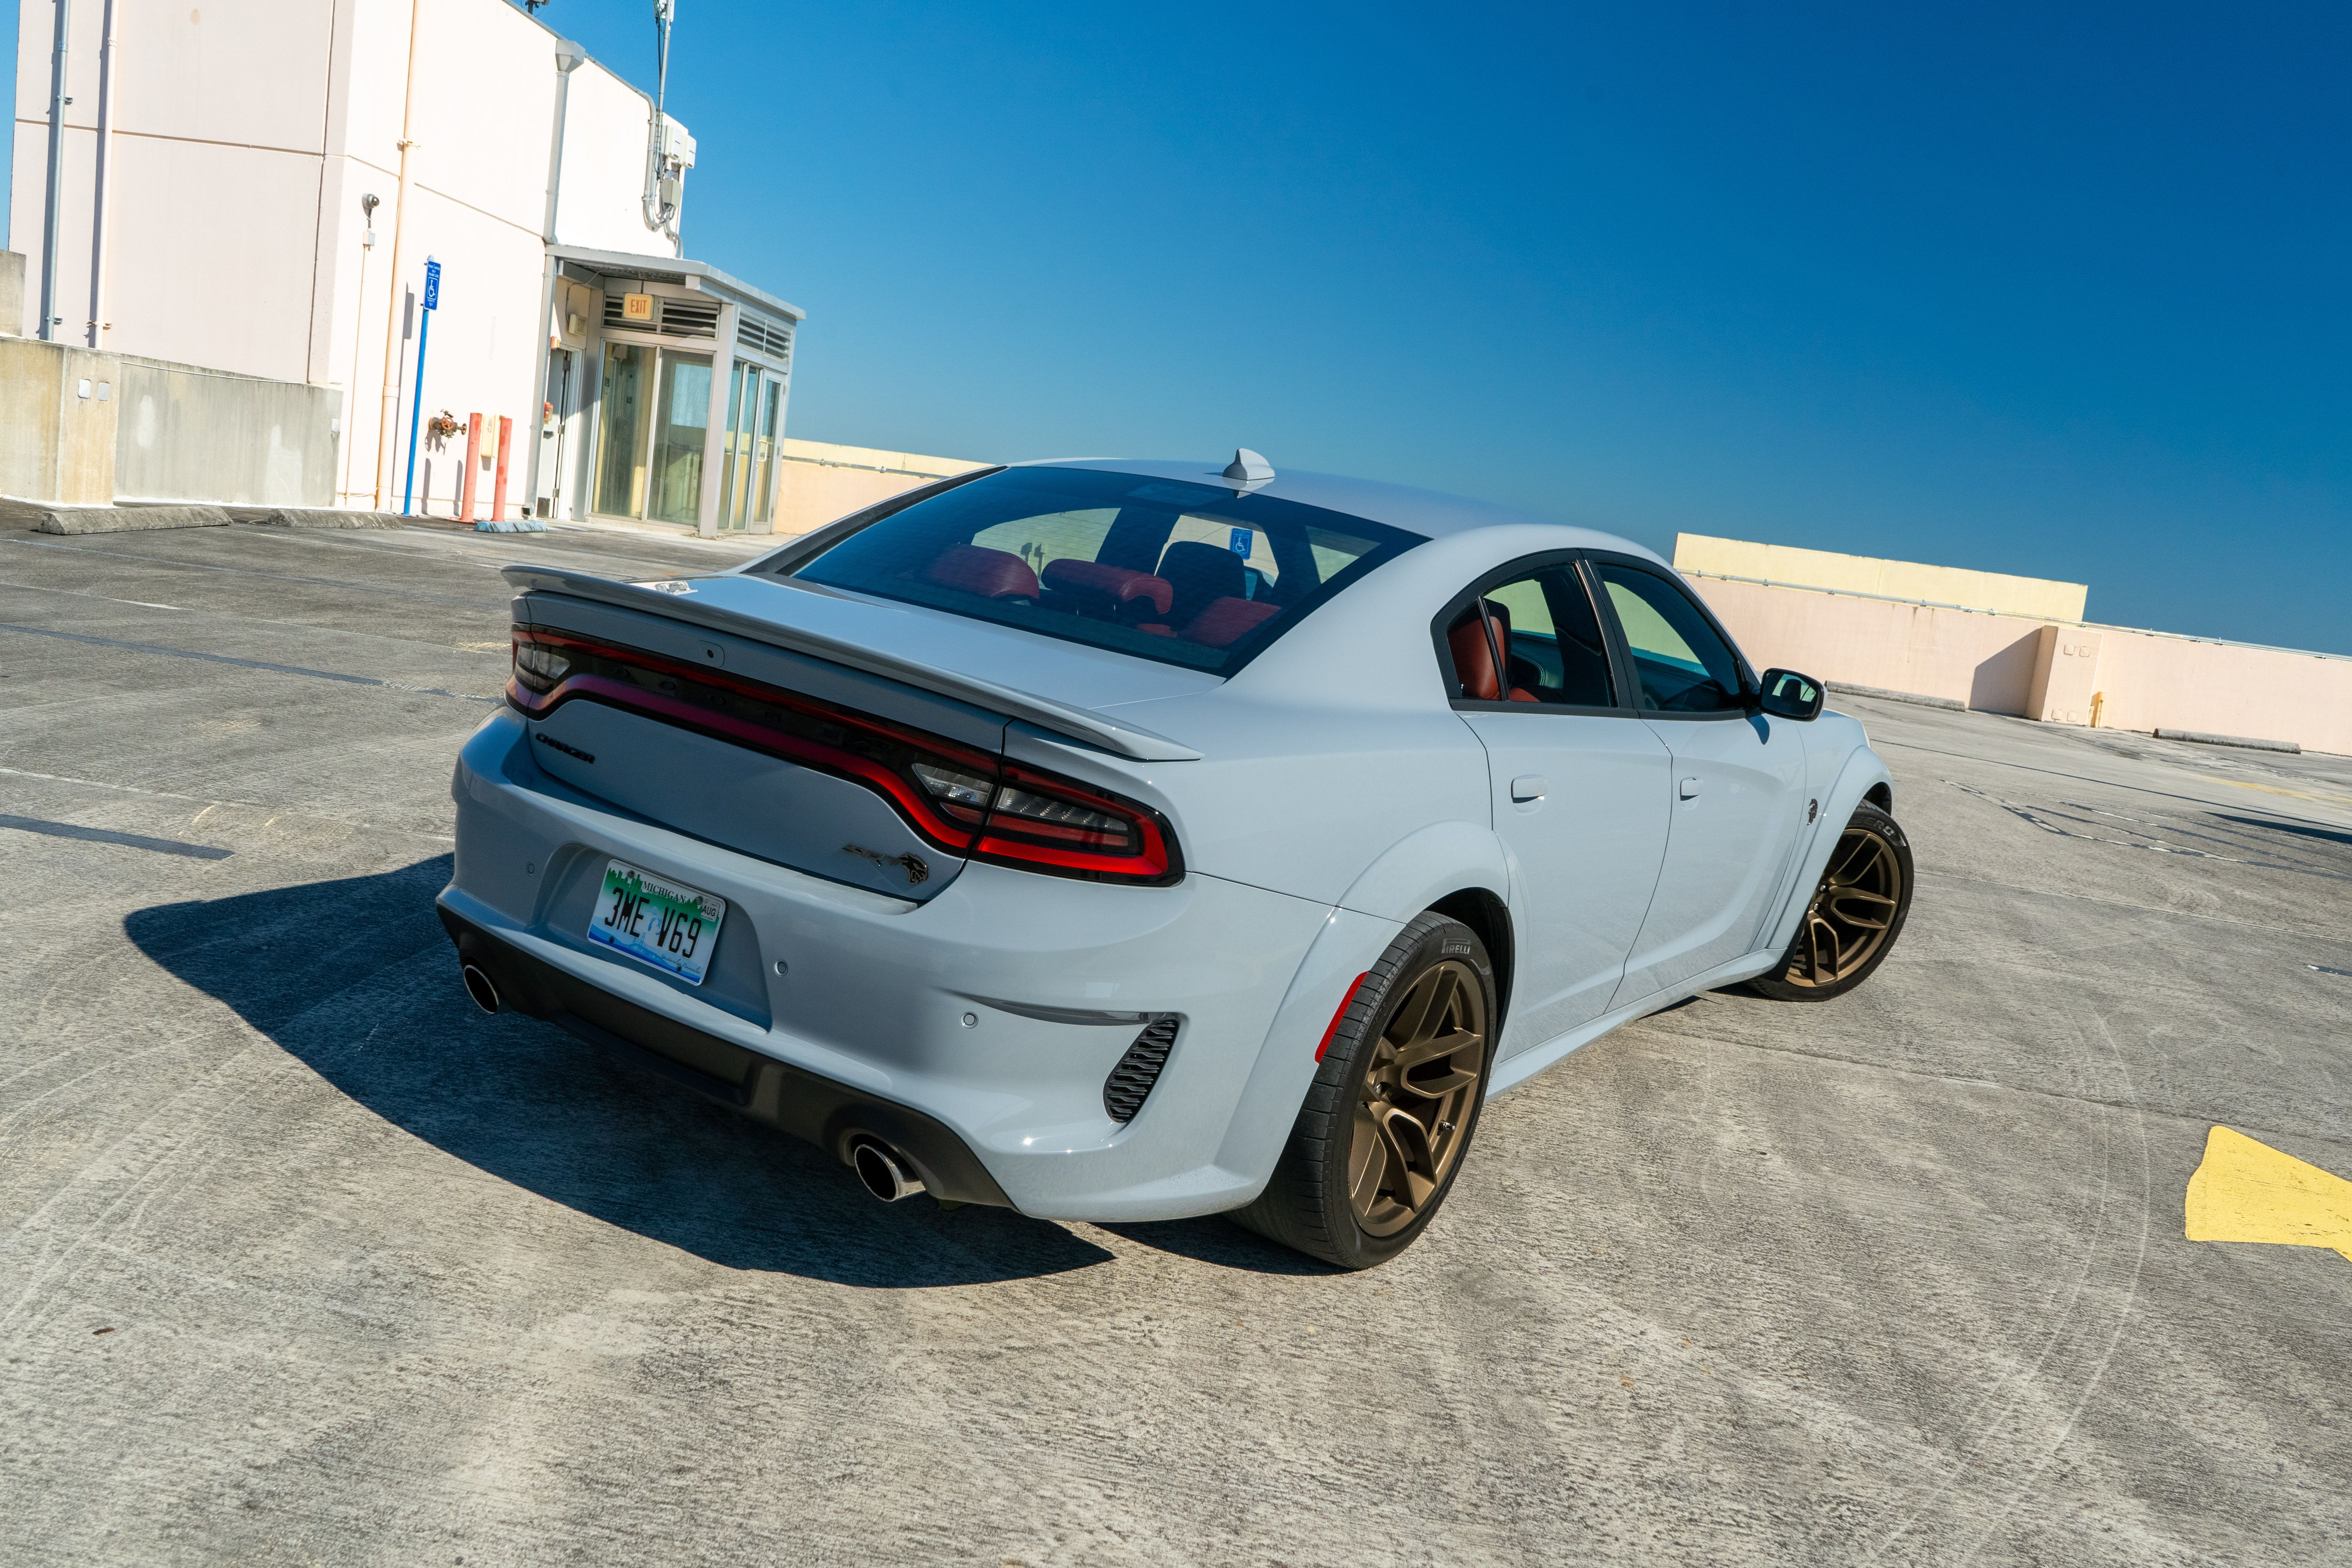 2021 Dodge Charger Hellcat Redeye - Driven